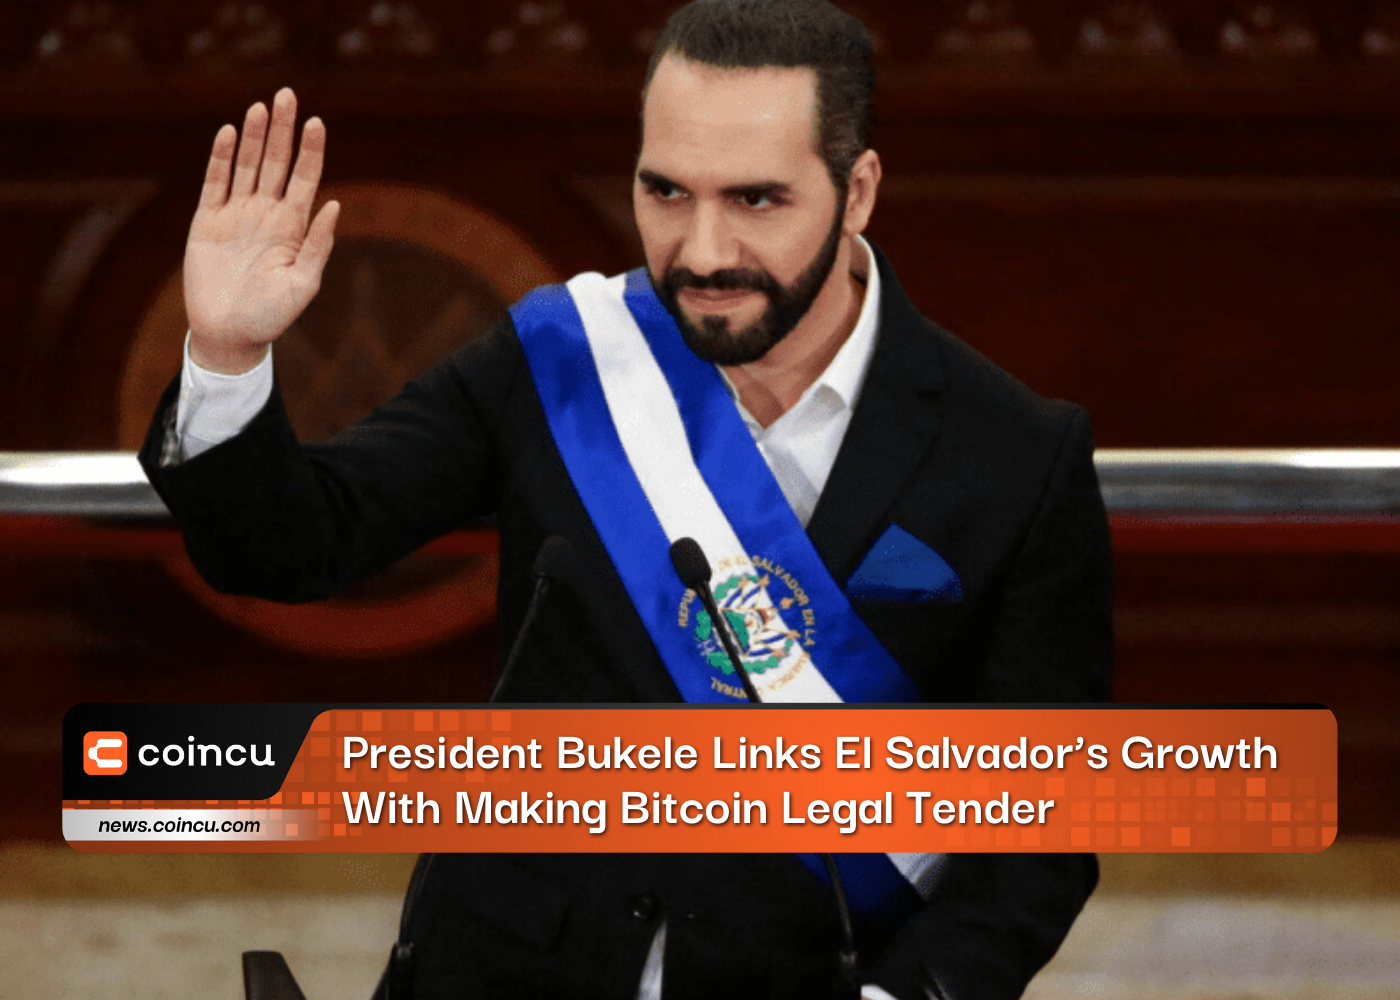 President Bukele Links El Salvador’s Growth With Making Bitcoin Legal Tender